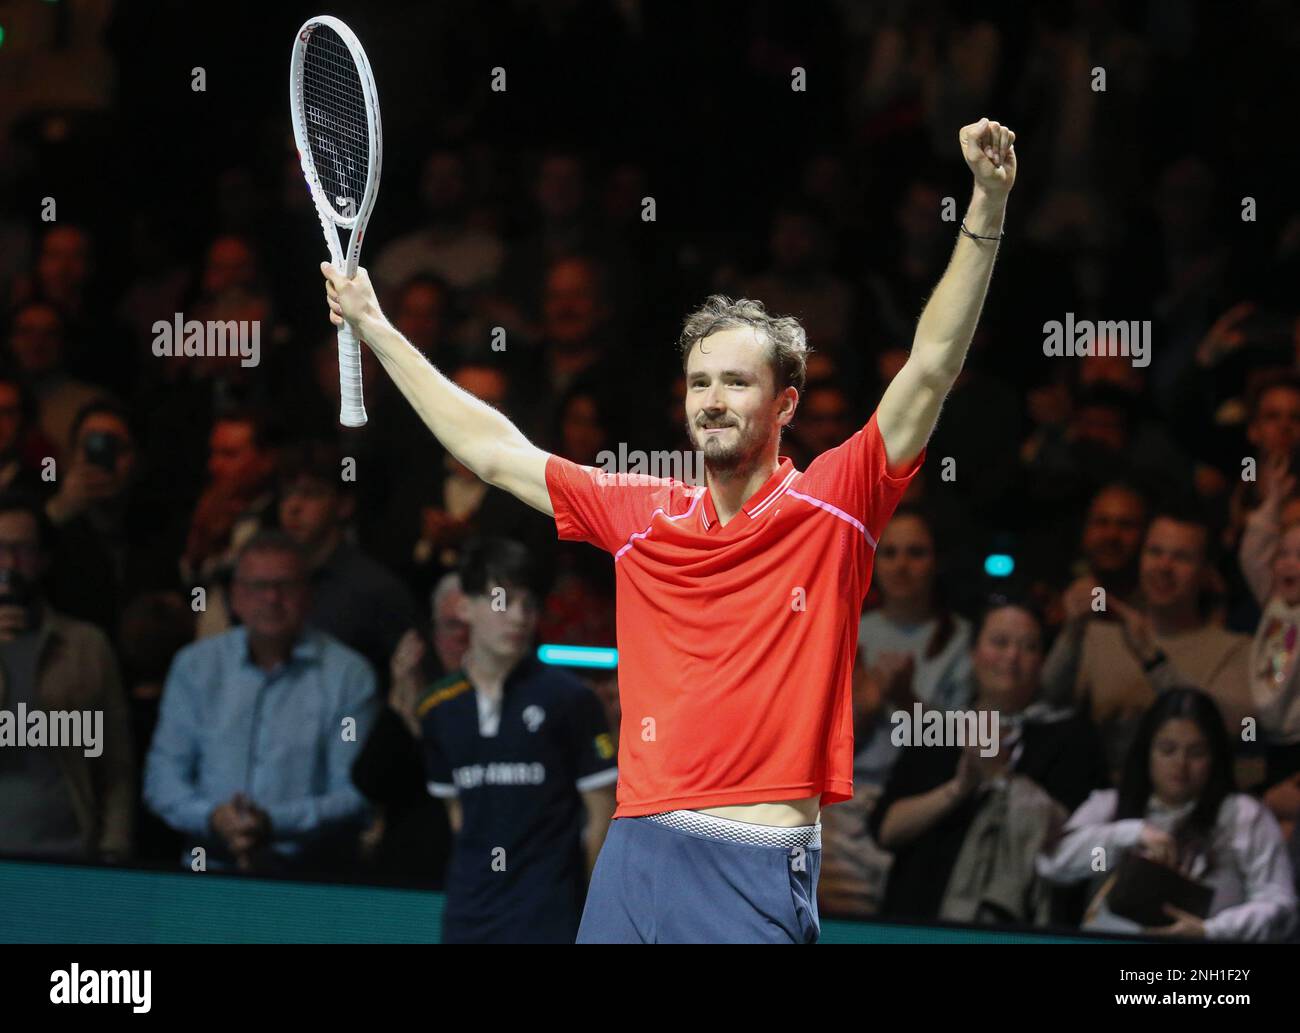 Abn tennis tournament rotterdam hi-res stock photography and images - Alamy